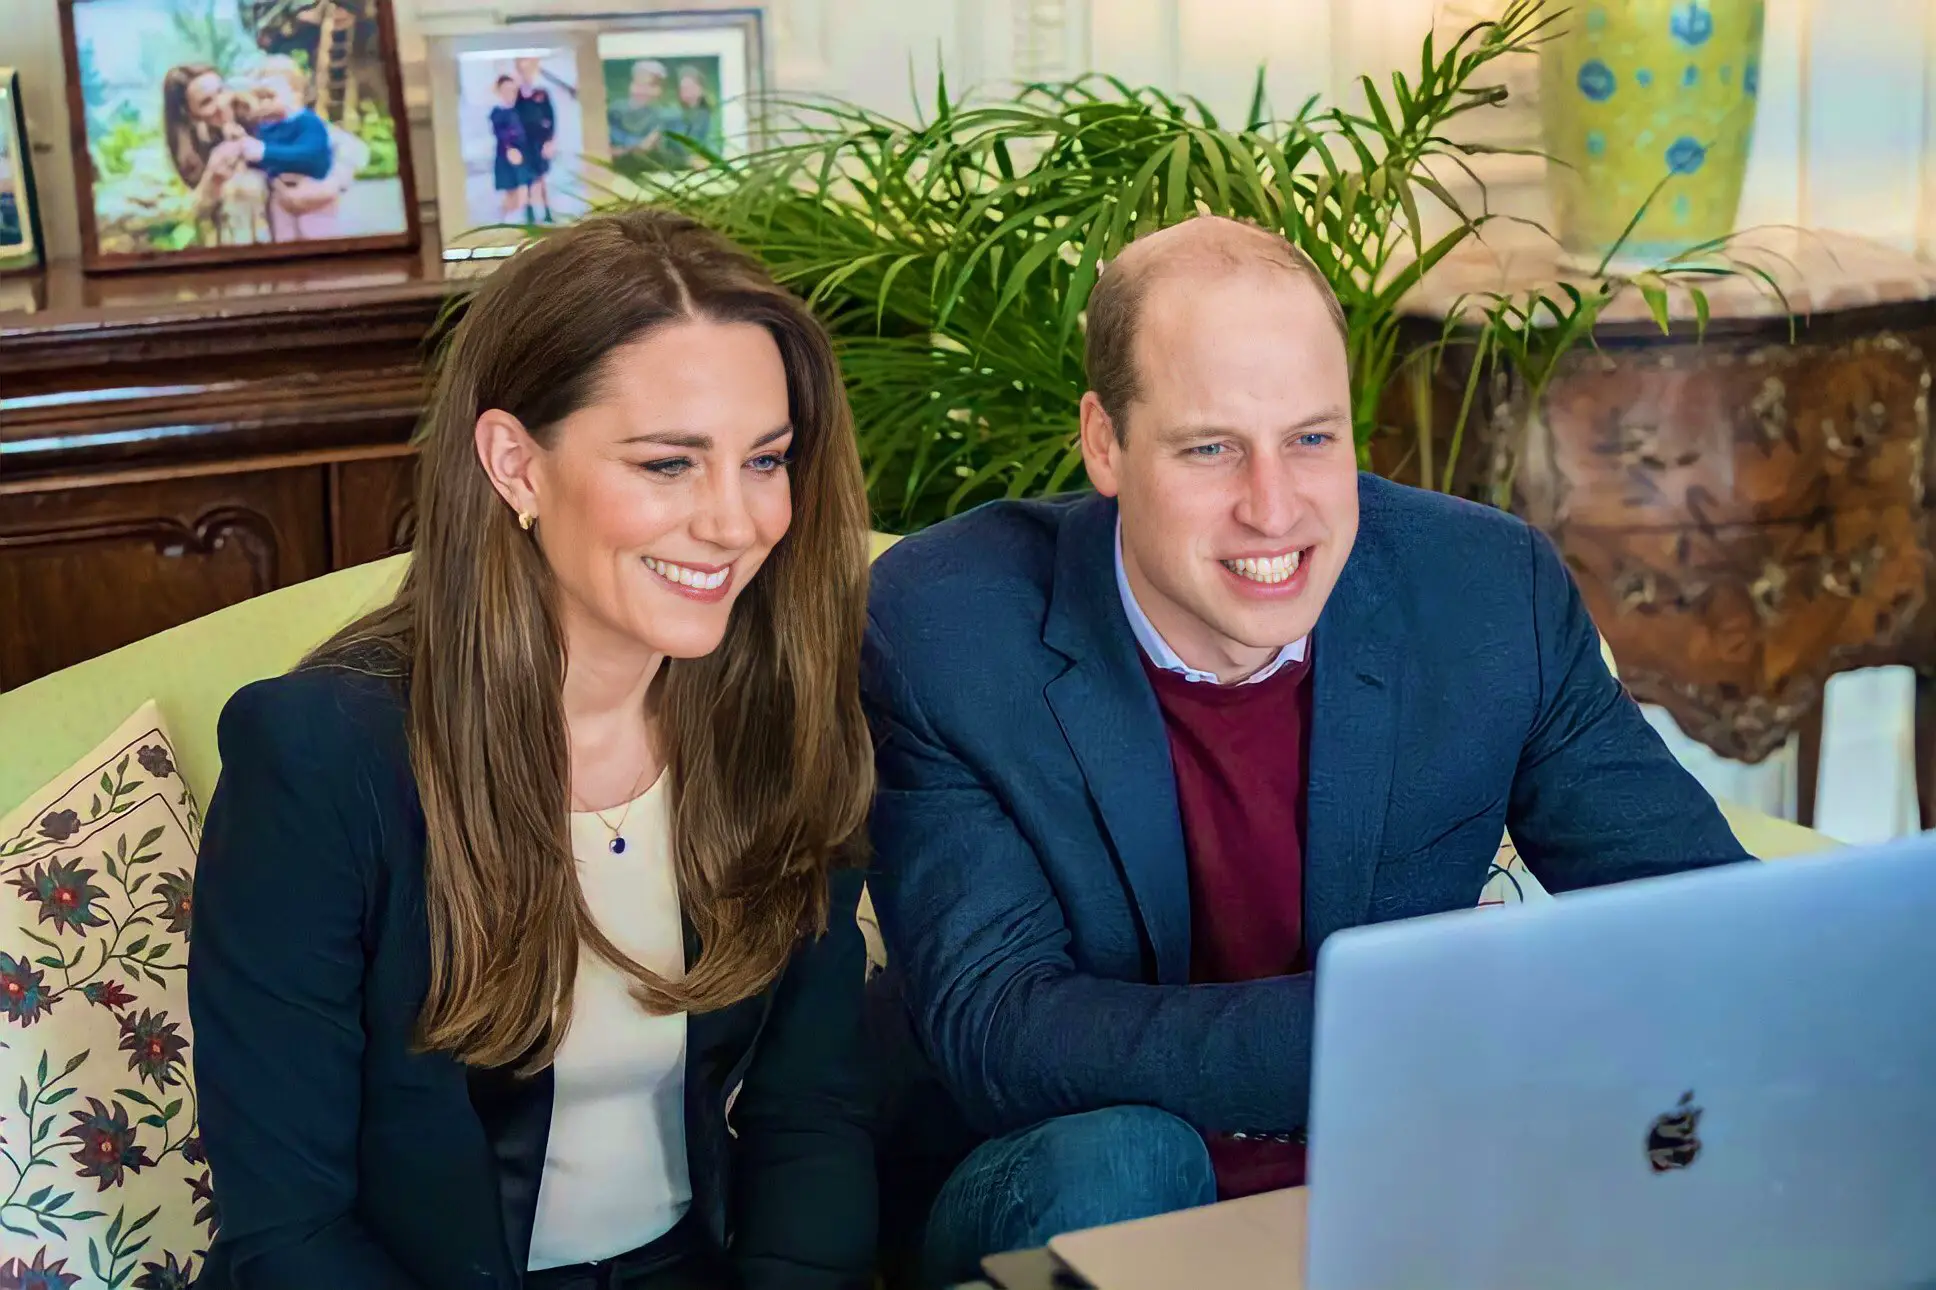 The Duke and Duchess of Cambridge made a video call to Ulster Unviersity Nursing Students